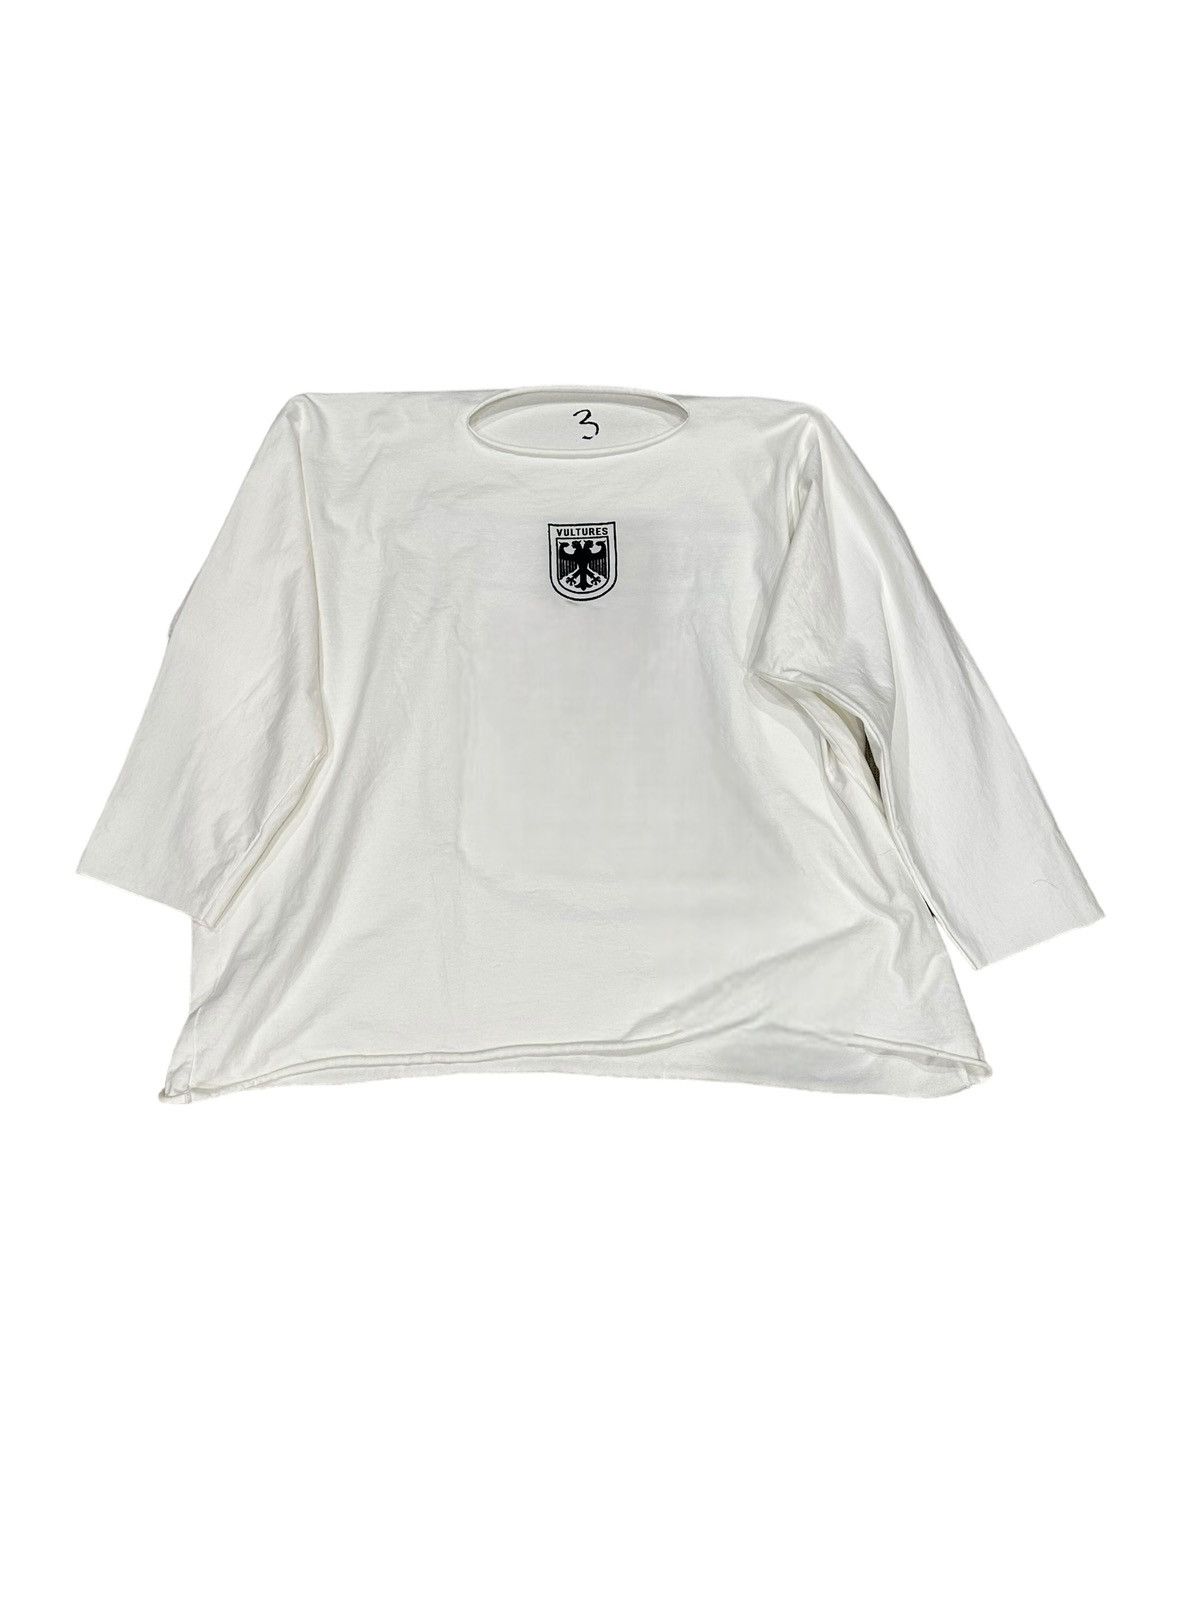 Kanye West Vultures Long Sleeve NEW Size 3 (L/XL) | Grailed